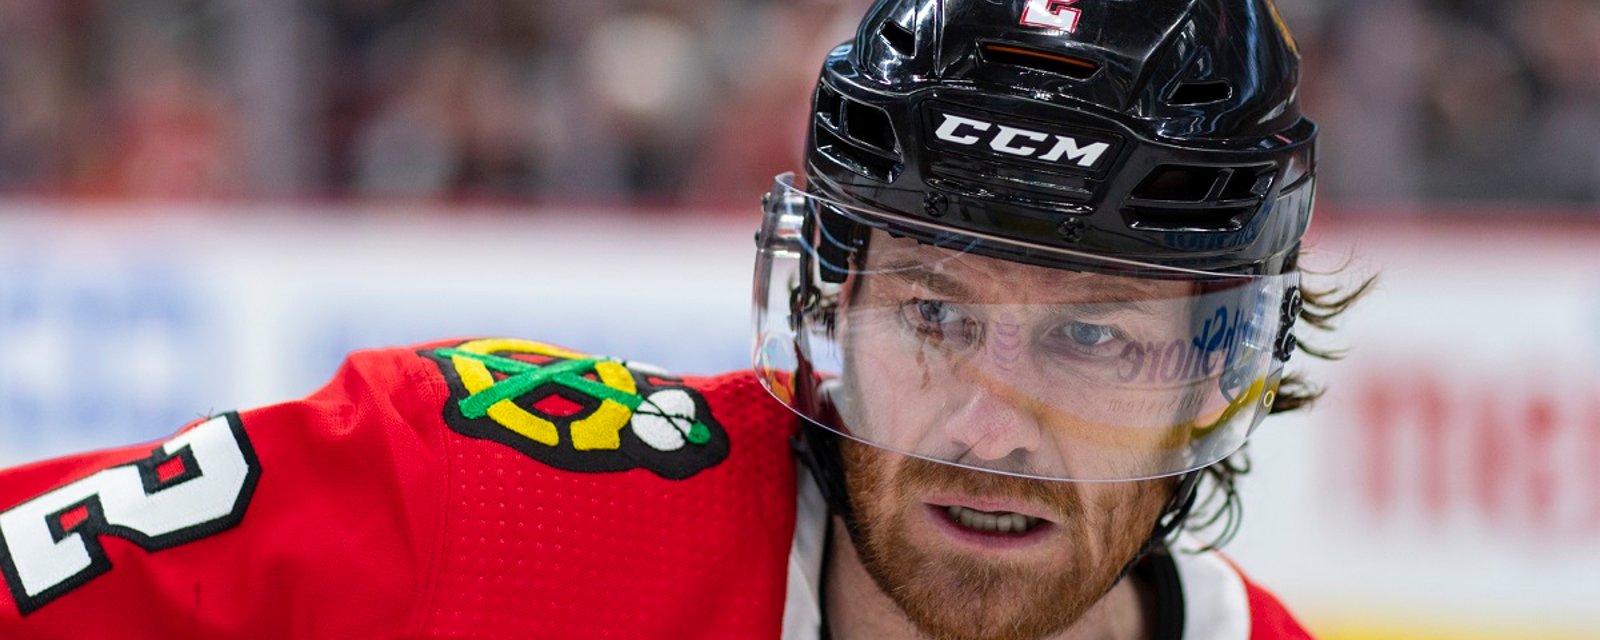 Duncan Keith's current ironman streak comes to an end due to injury.